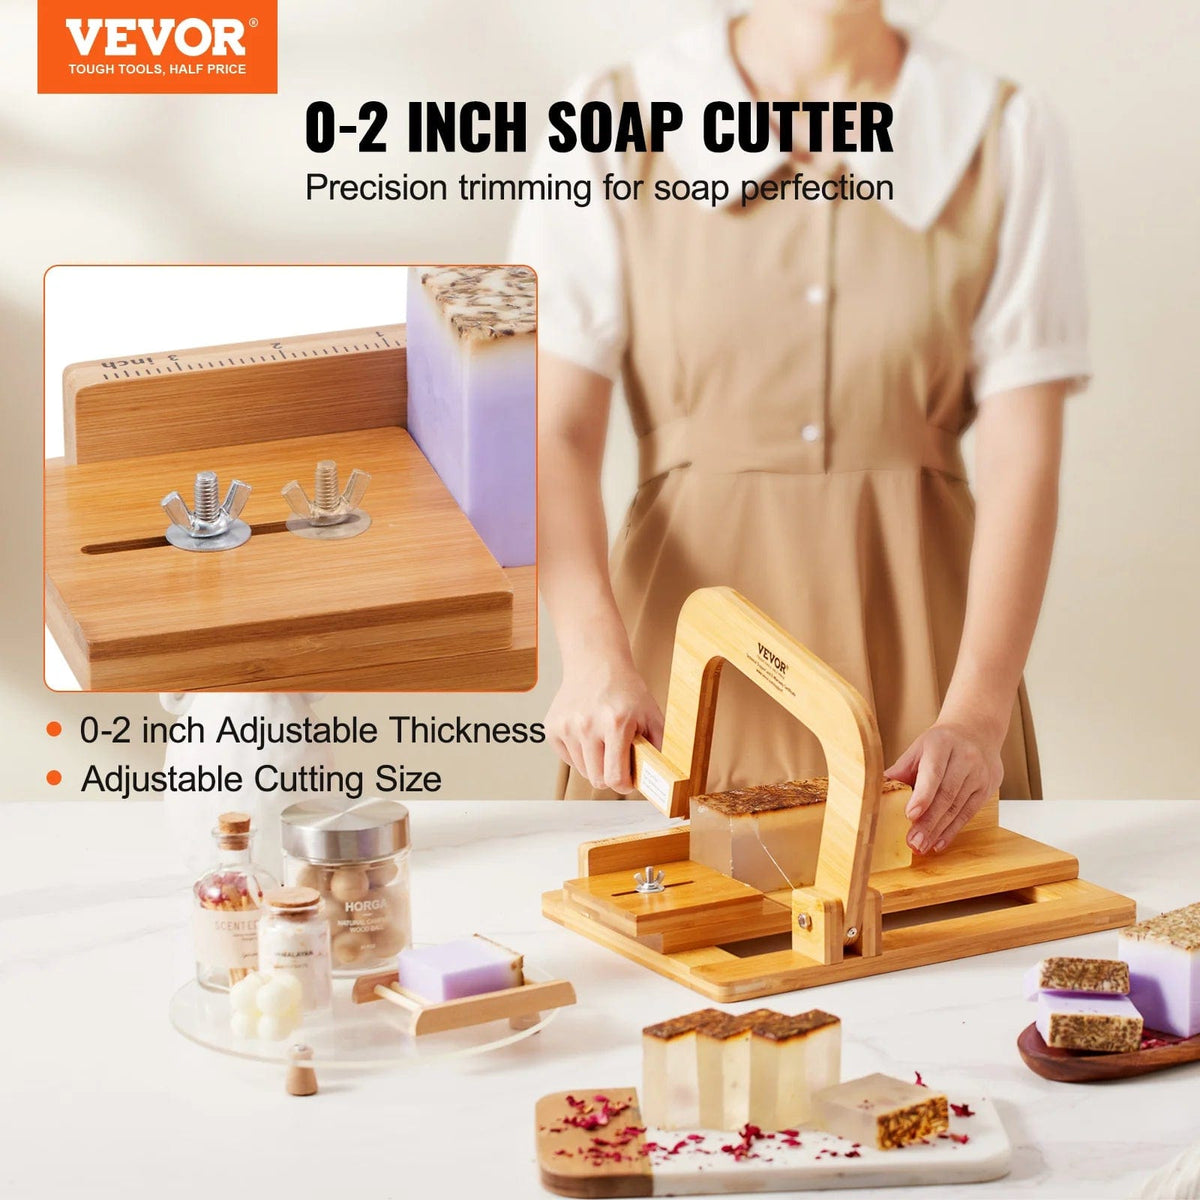 Precision Adjustable Bamboo Soap Cutter Kit - Versatile & Hygienic Crafting Tool with Easy Installation, Ideal for Handmade Soaps, Candles & More - Includes 1-Year Warranty